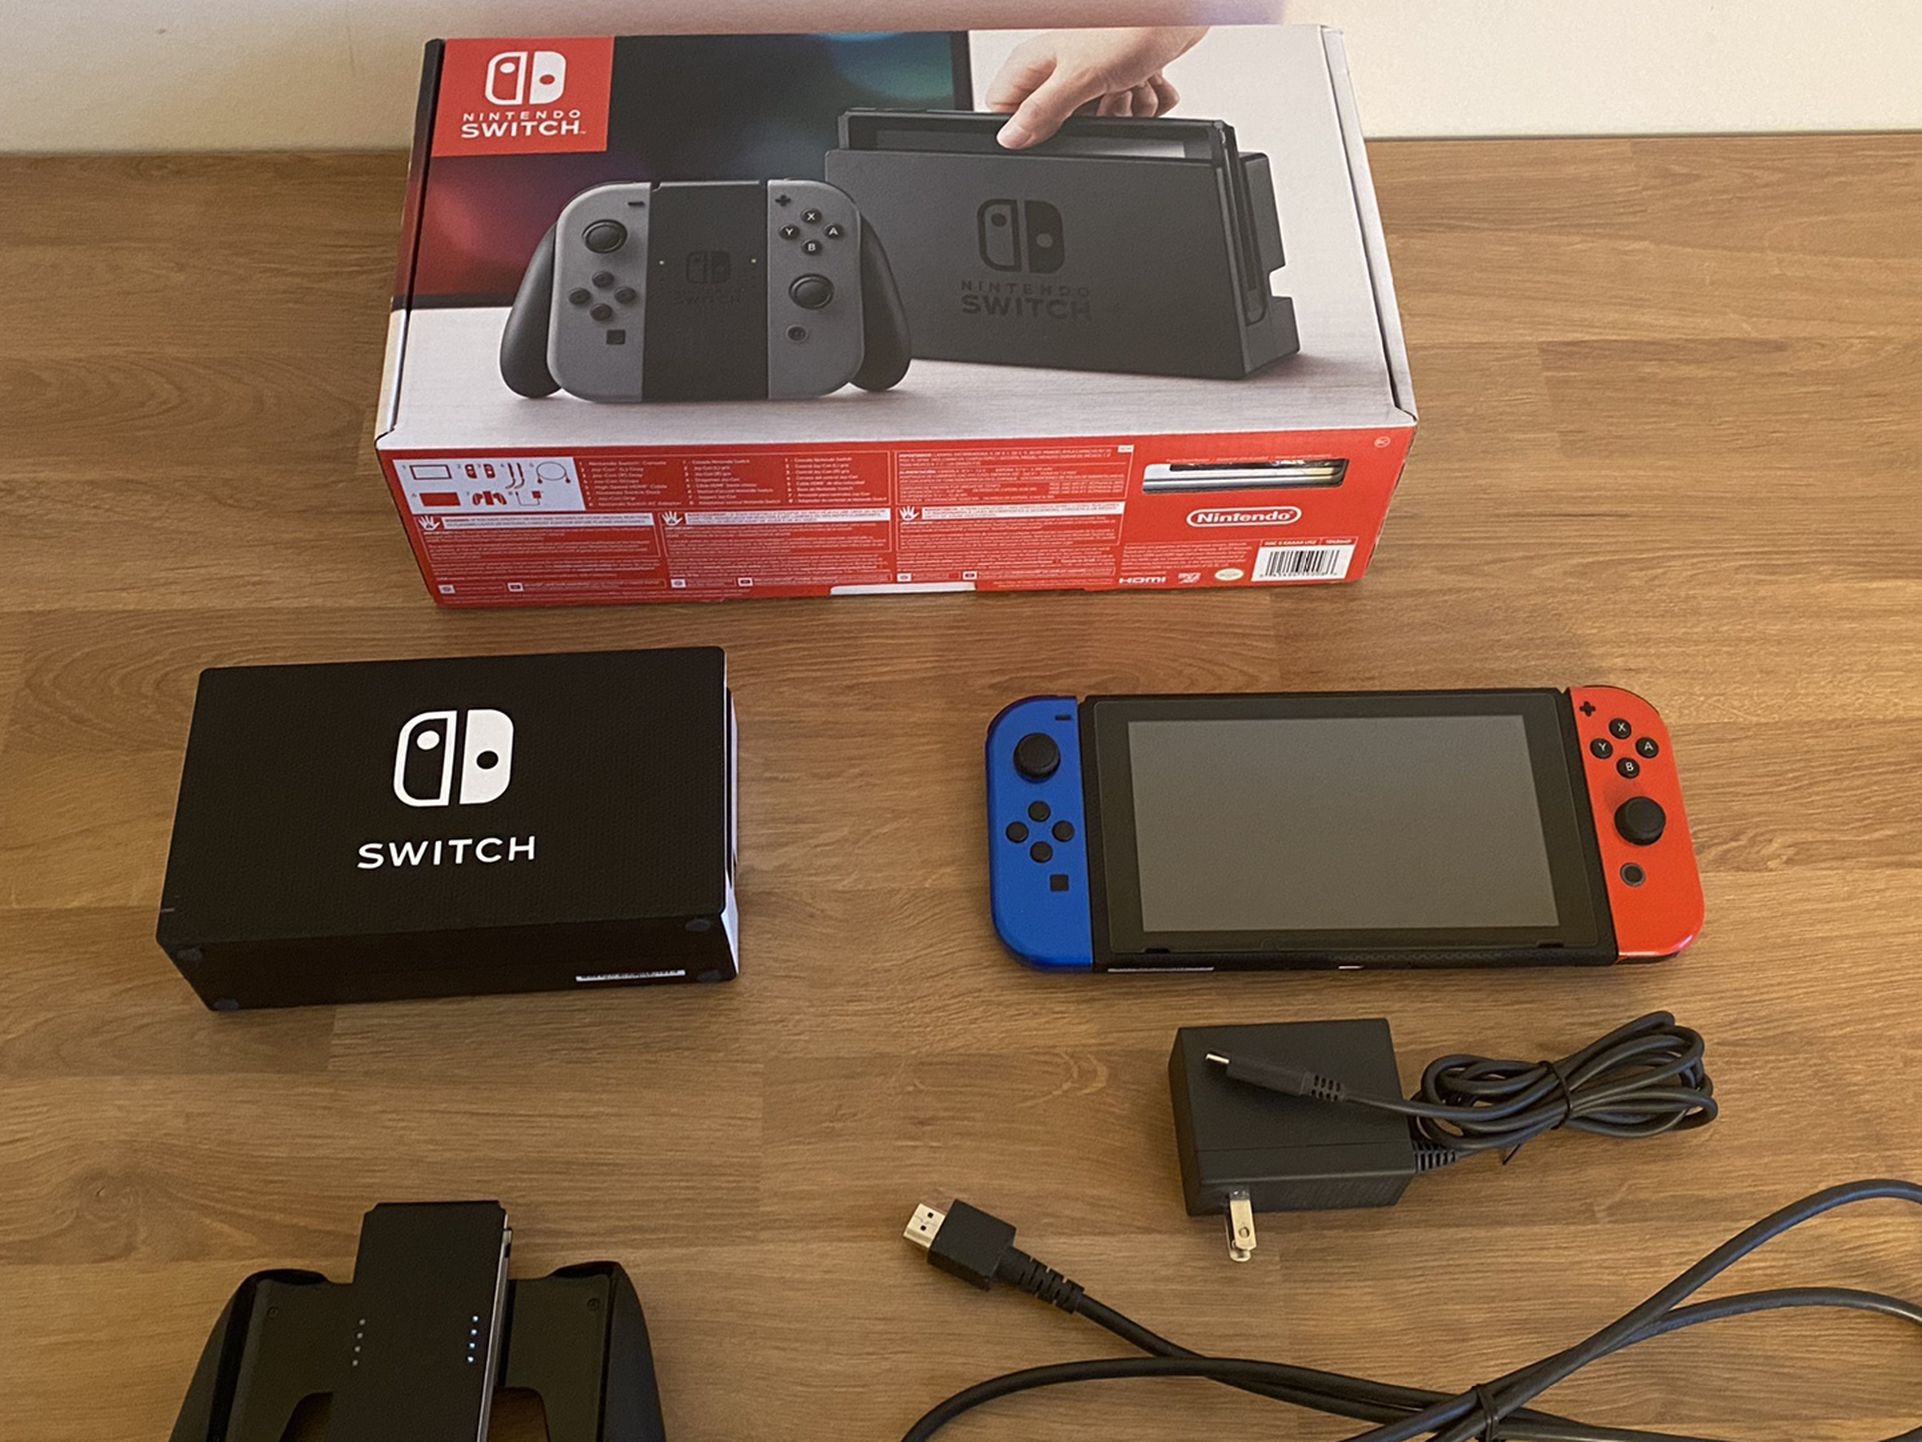 Nintendo Switch With Gray Joy-Con and Dbrand Skin